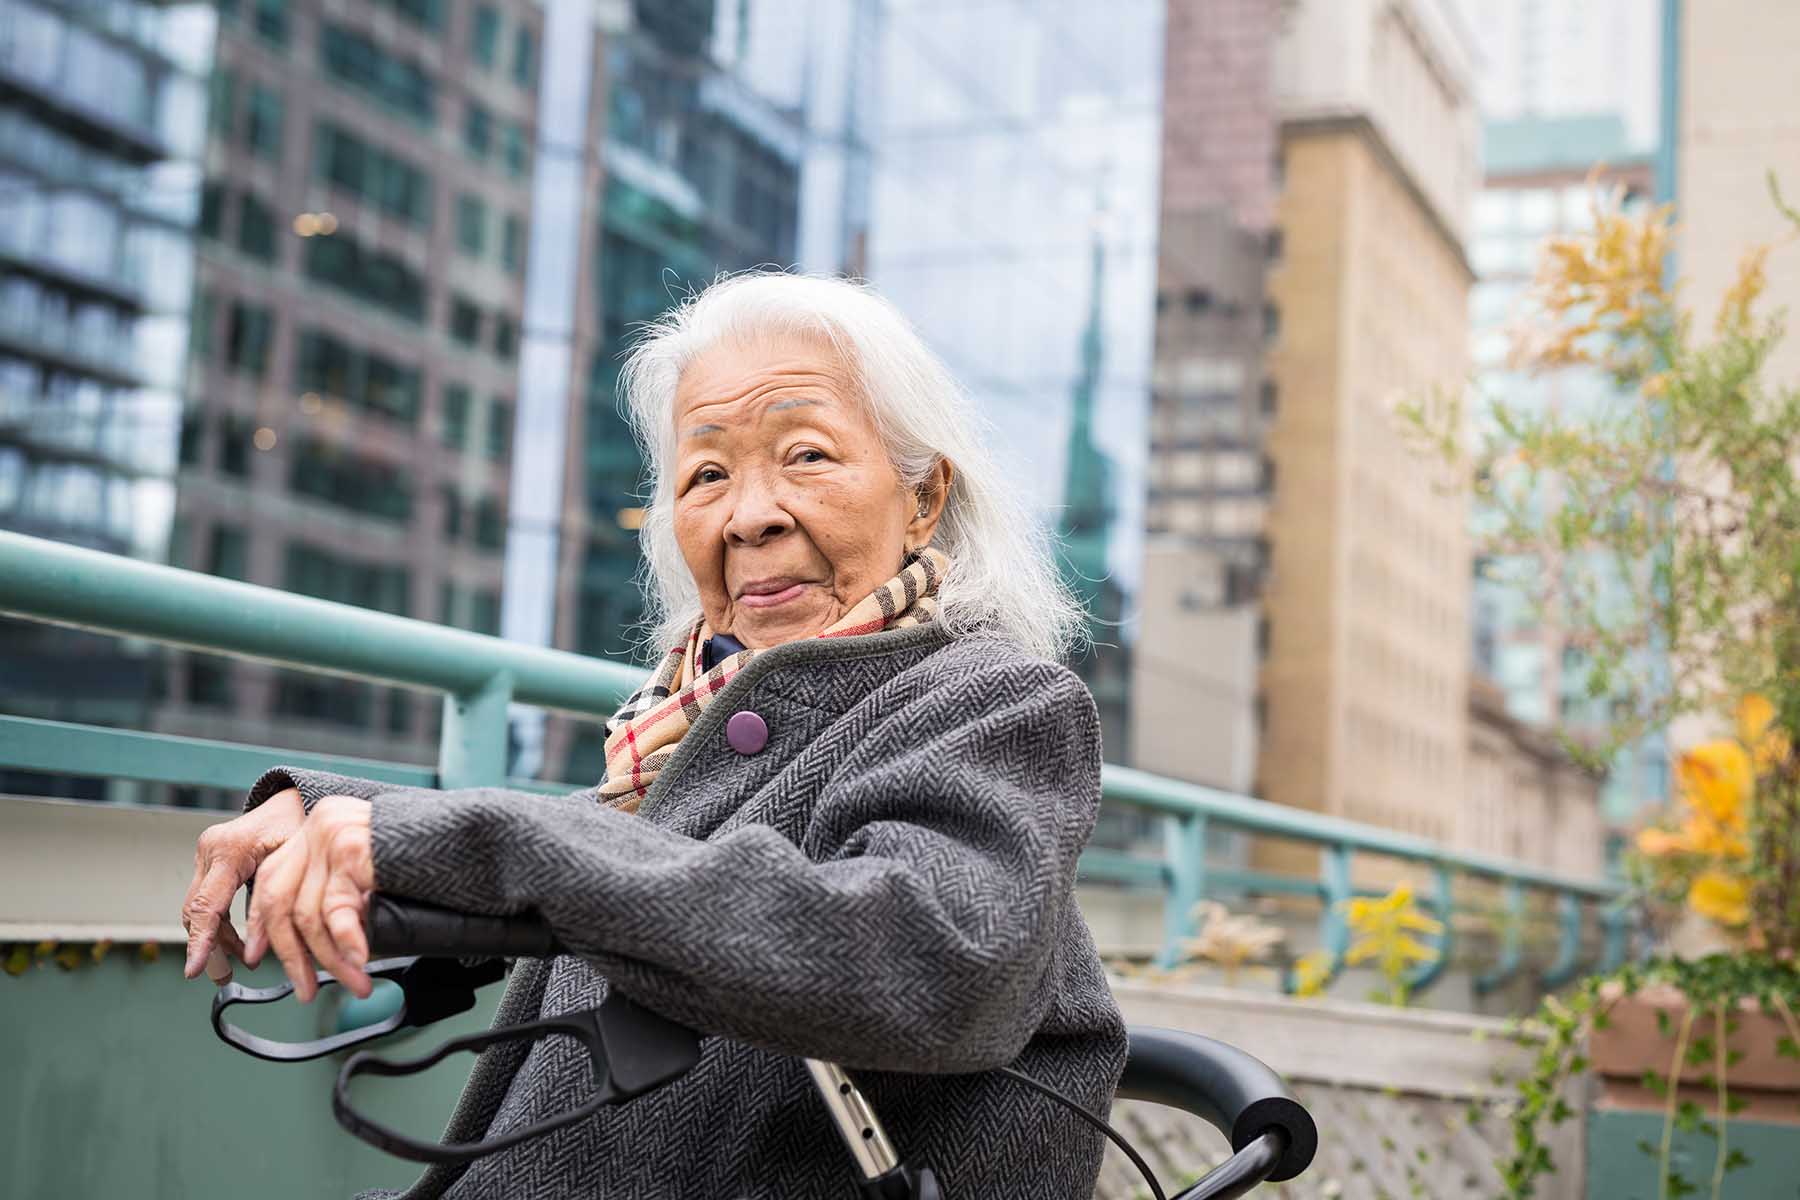 Old lady sitting in her mobility walker while looking at the camera. She's sitting on a rooftop patio on an autumn day.